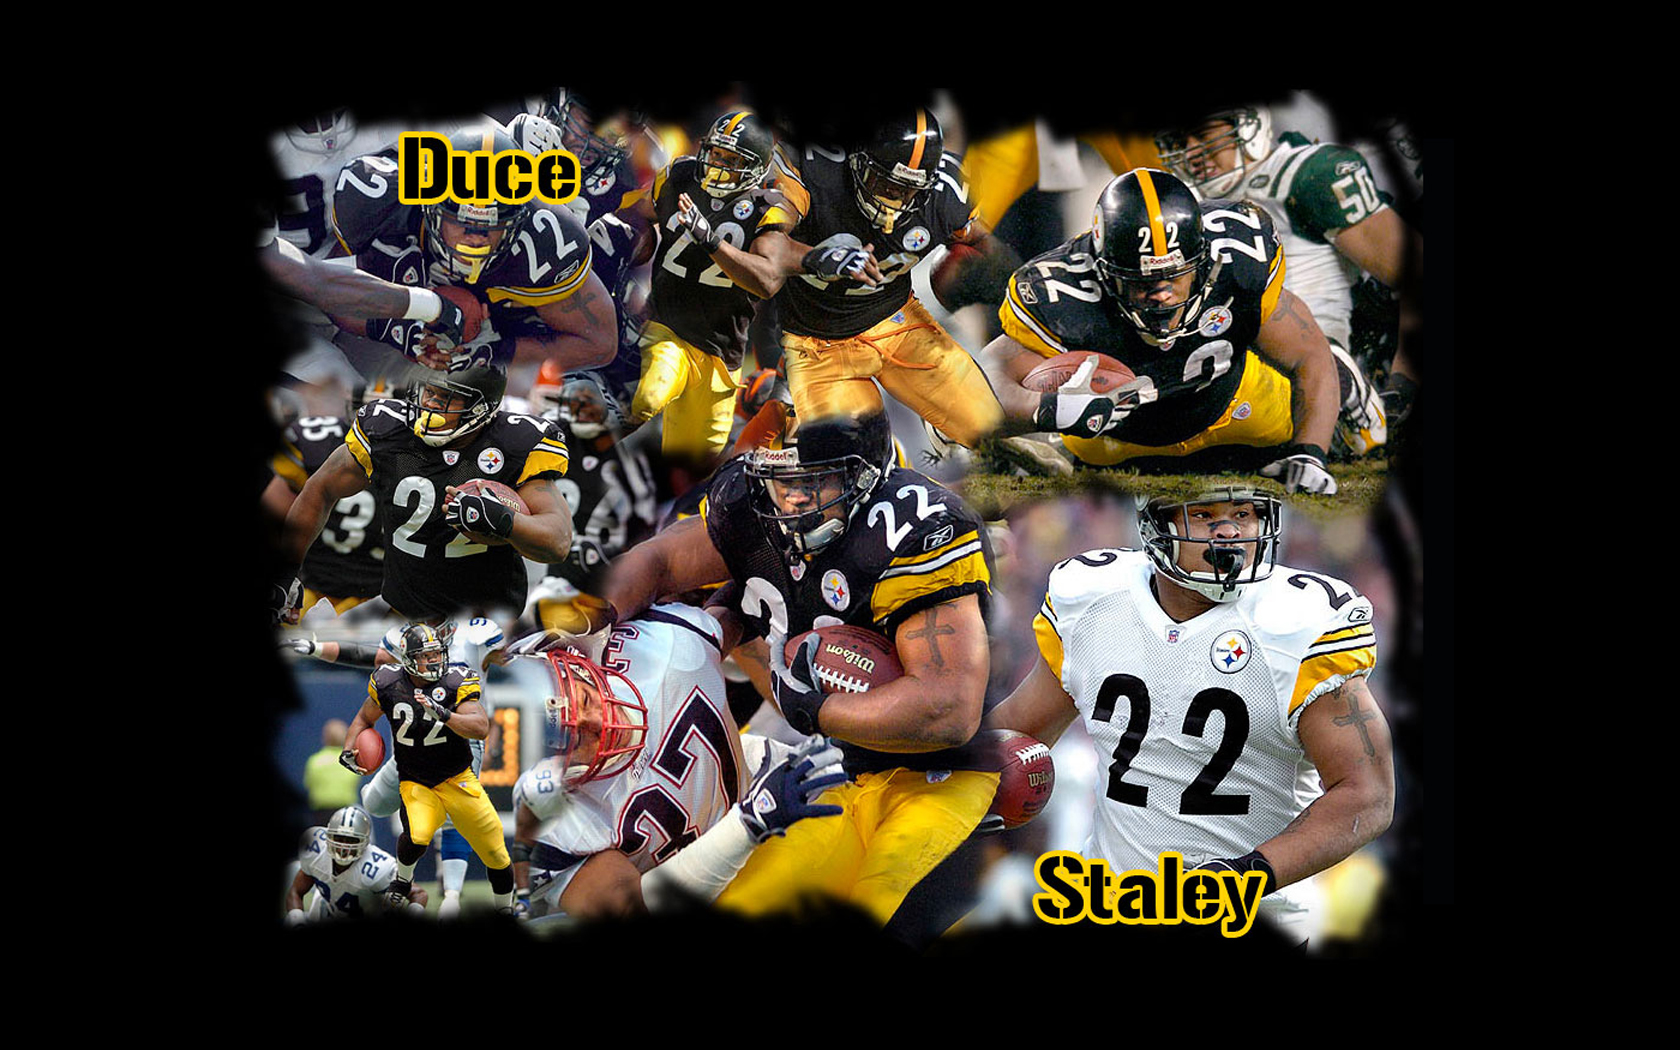 Steelers Or Even Videos Related To Pittsburgh Wallpaper